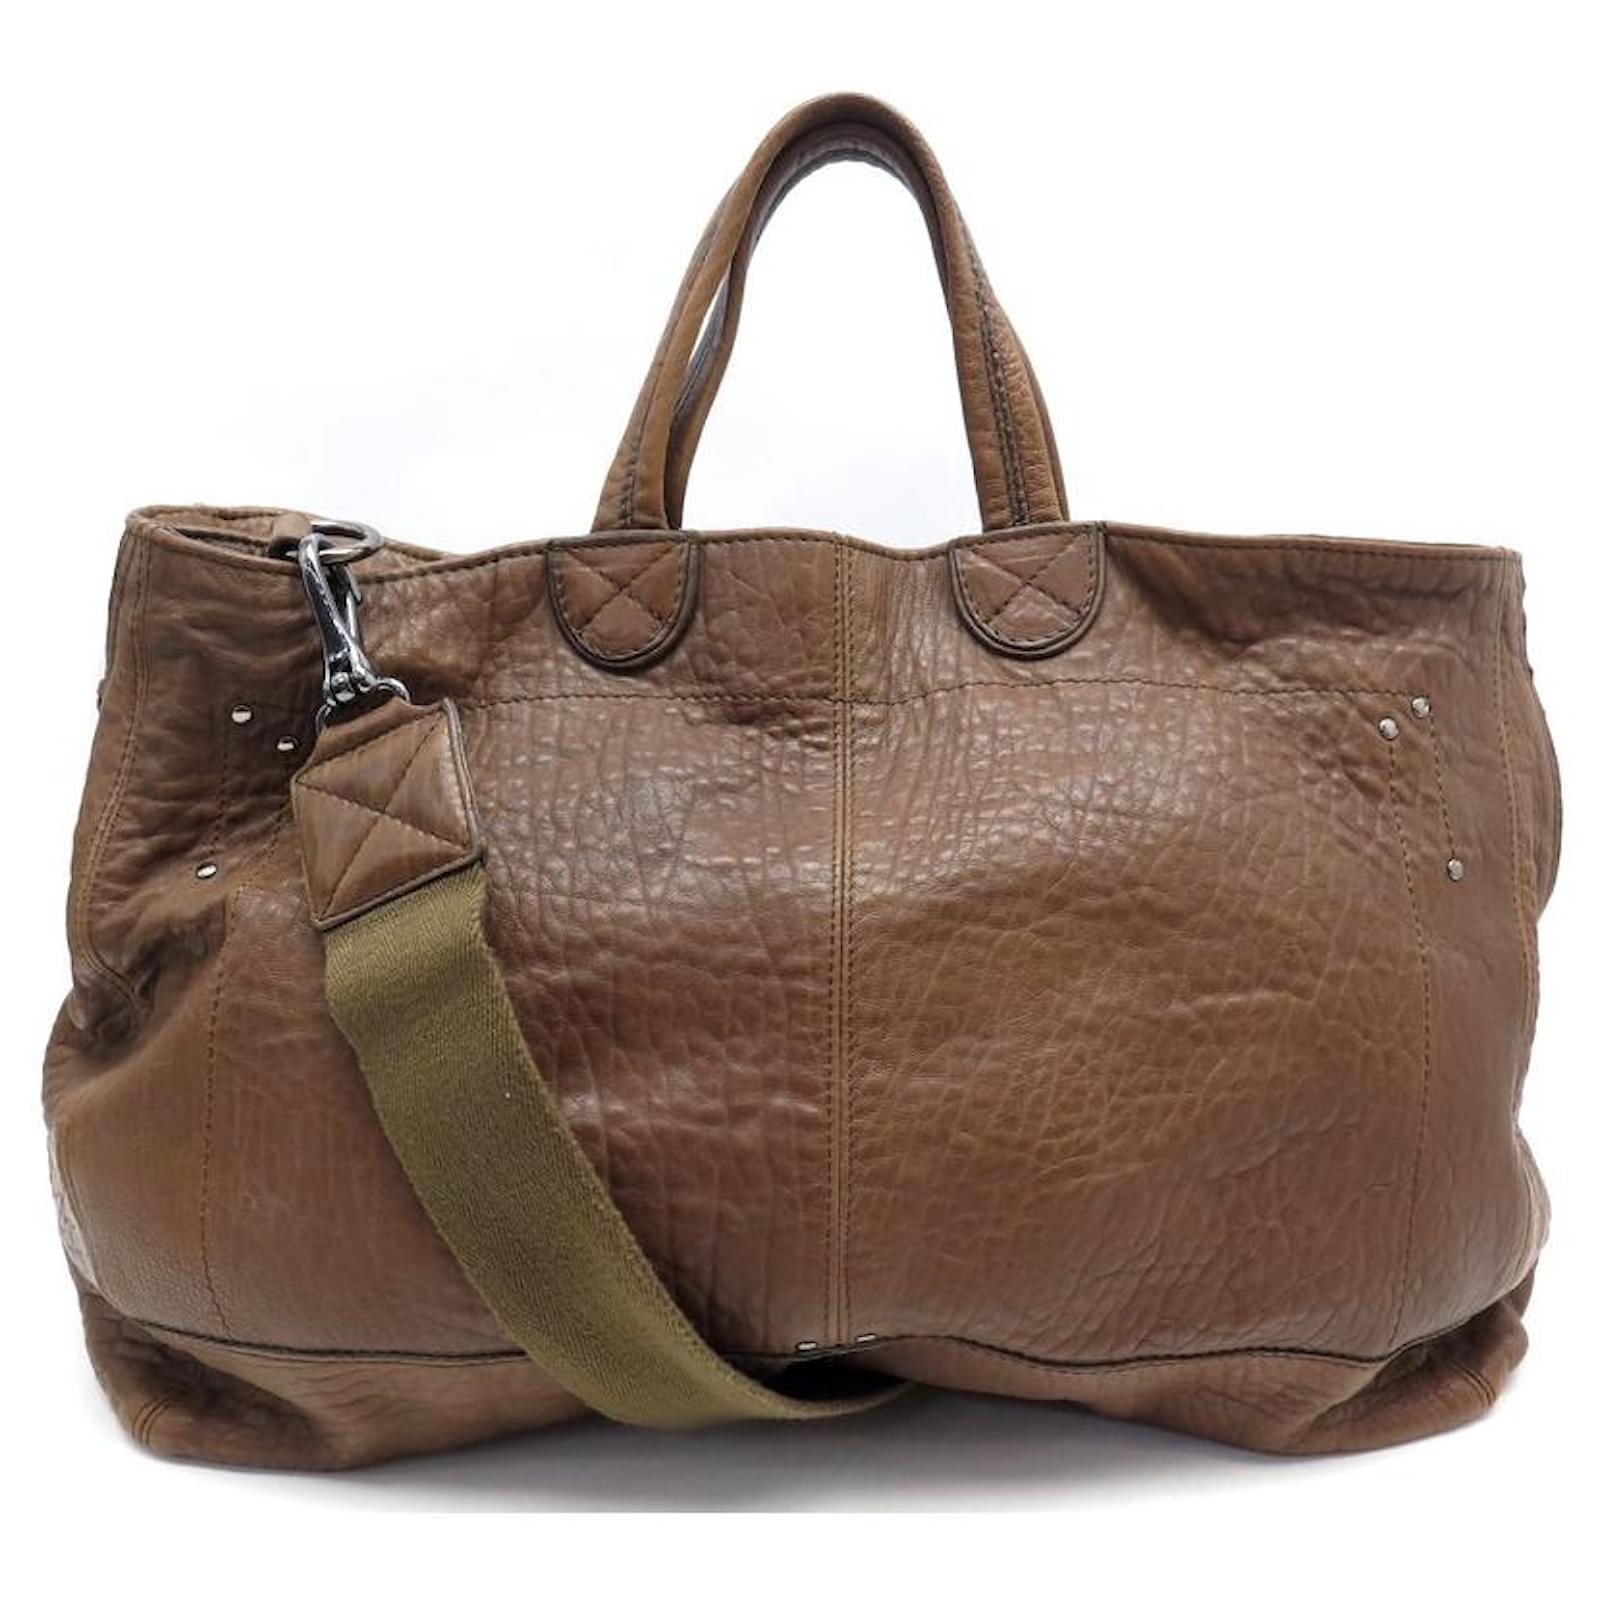 JEROME DREYFUSS CABAS MAX BANDOULIERE BAG IN BROWN LEATHER HAND